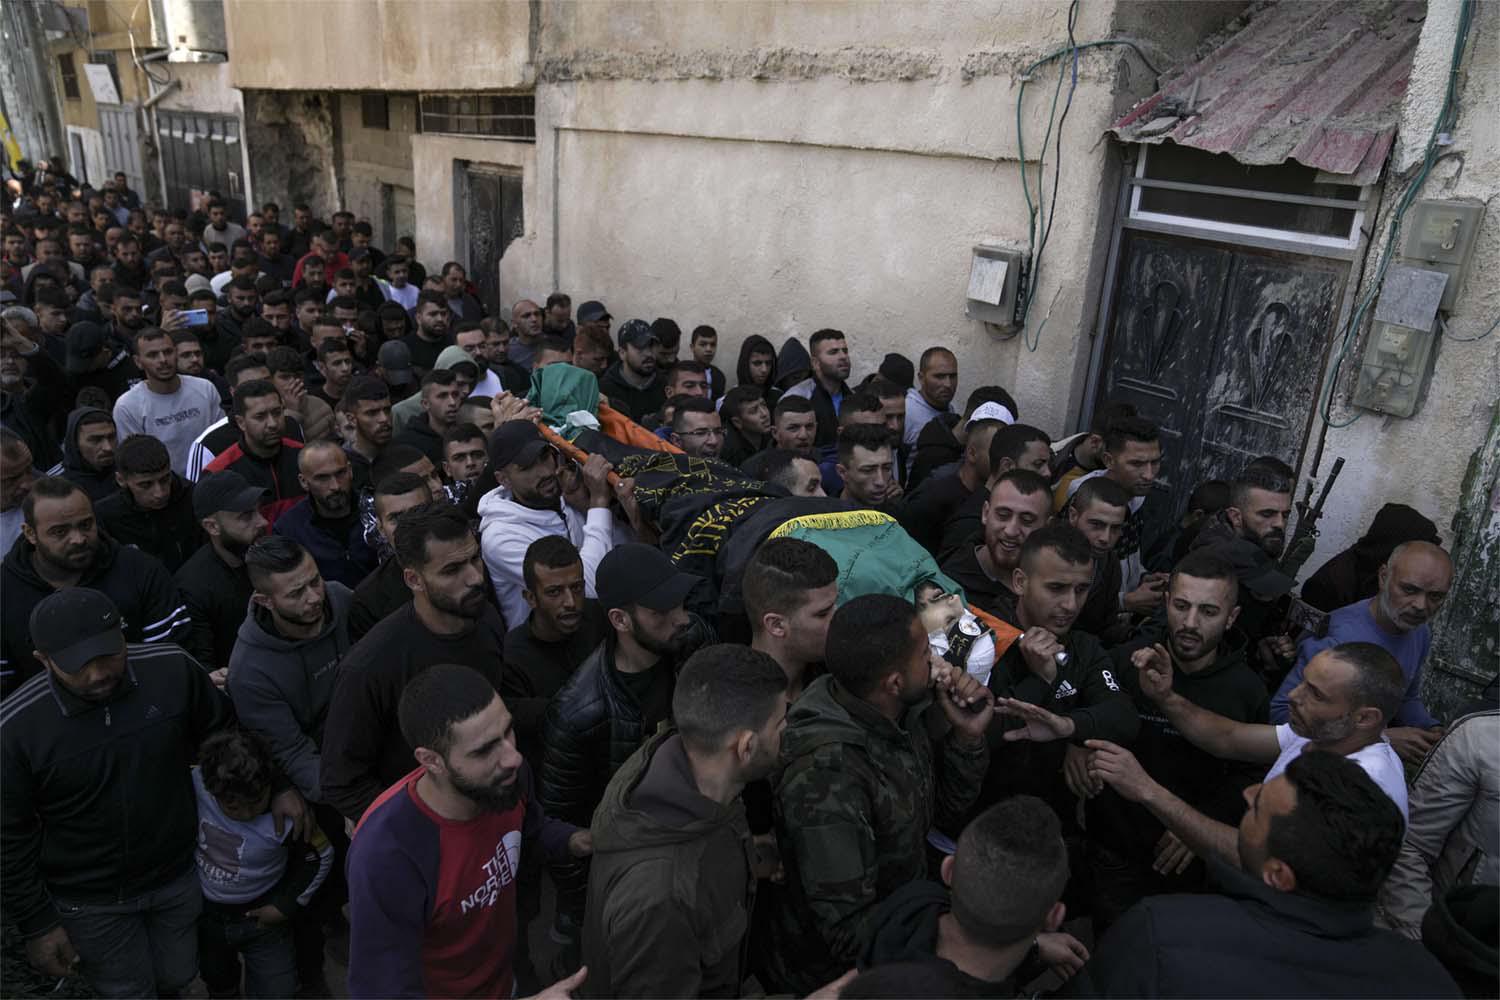 The Palestinian health ministry said a 14 year-old boy had died of his wounds